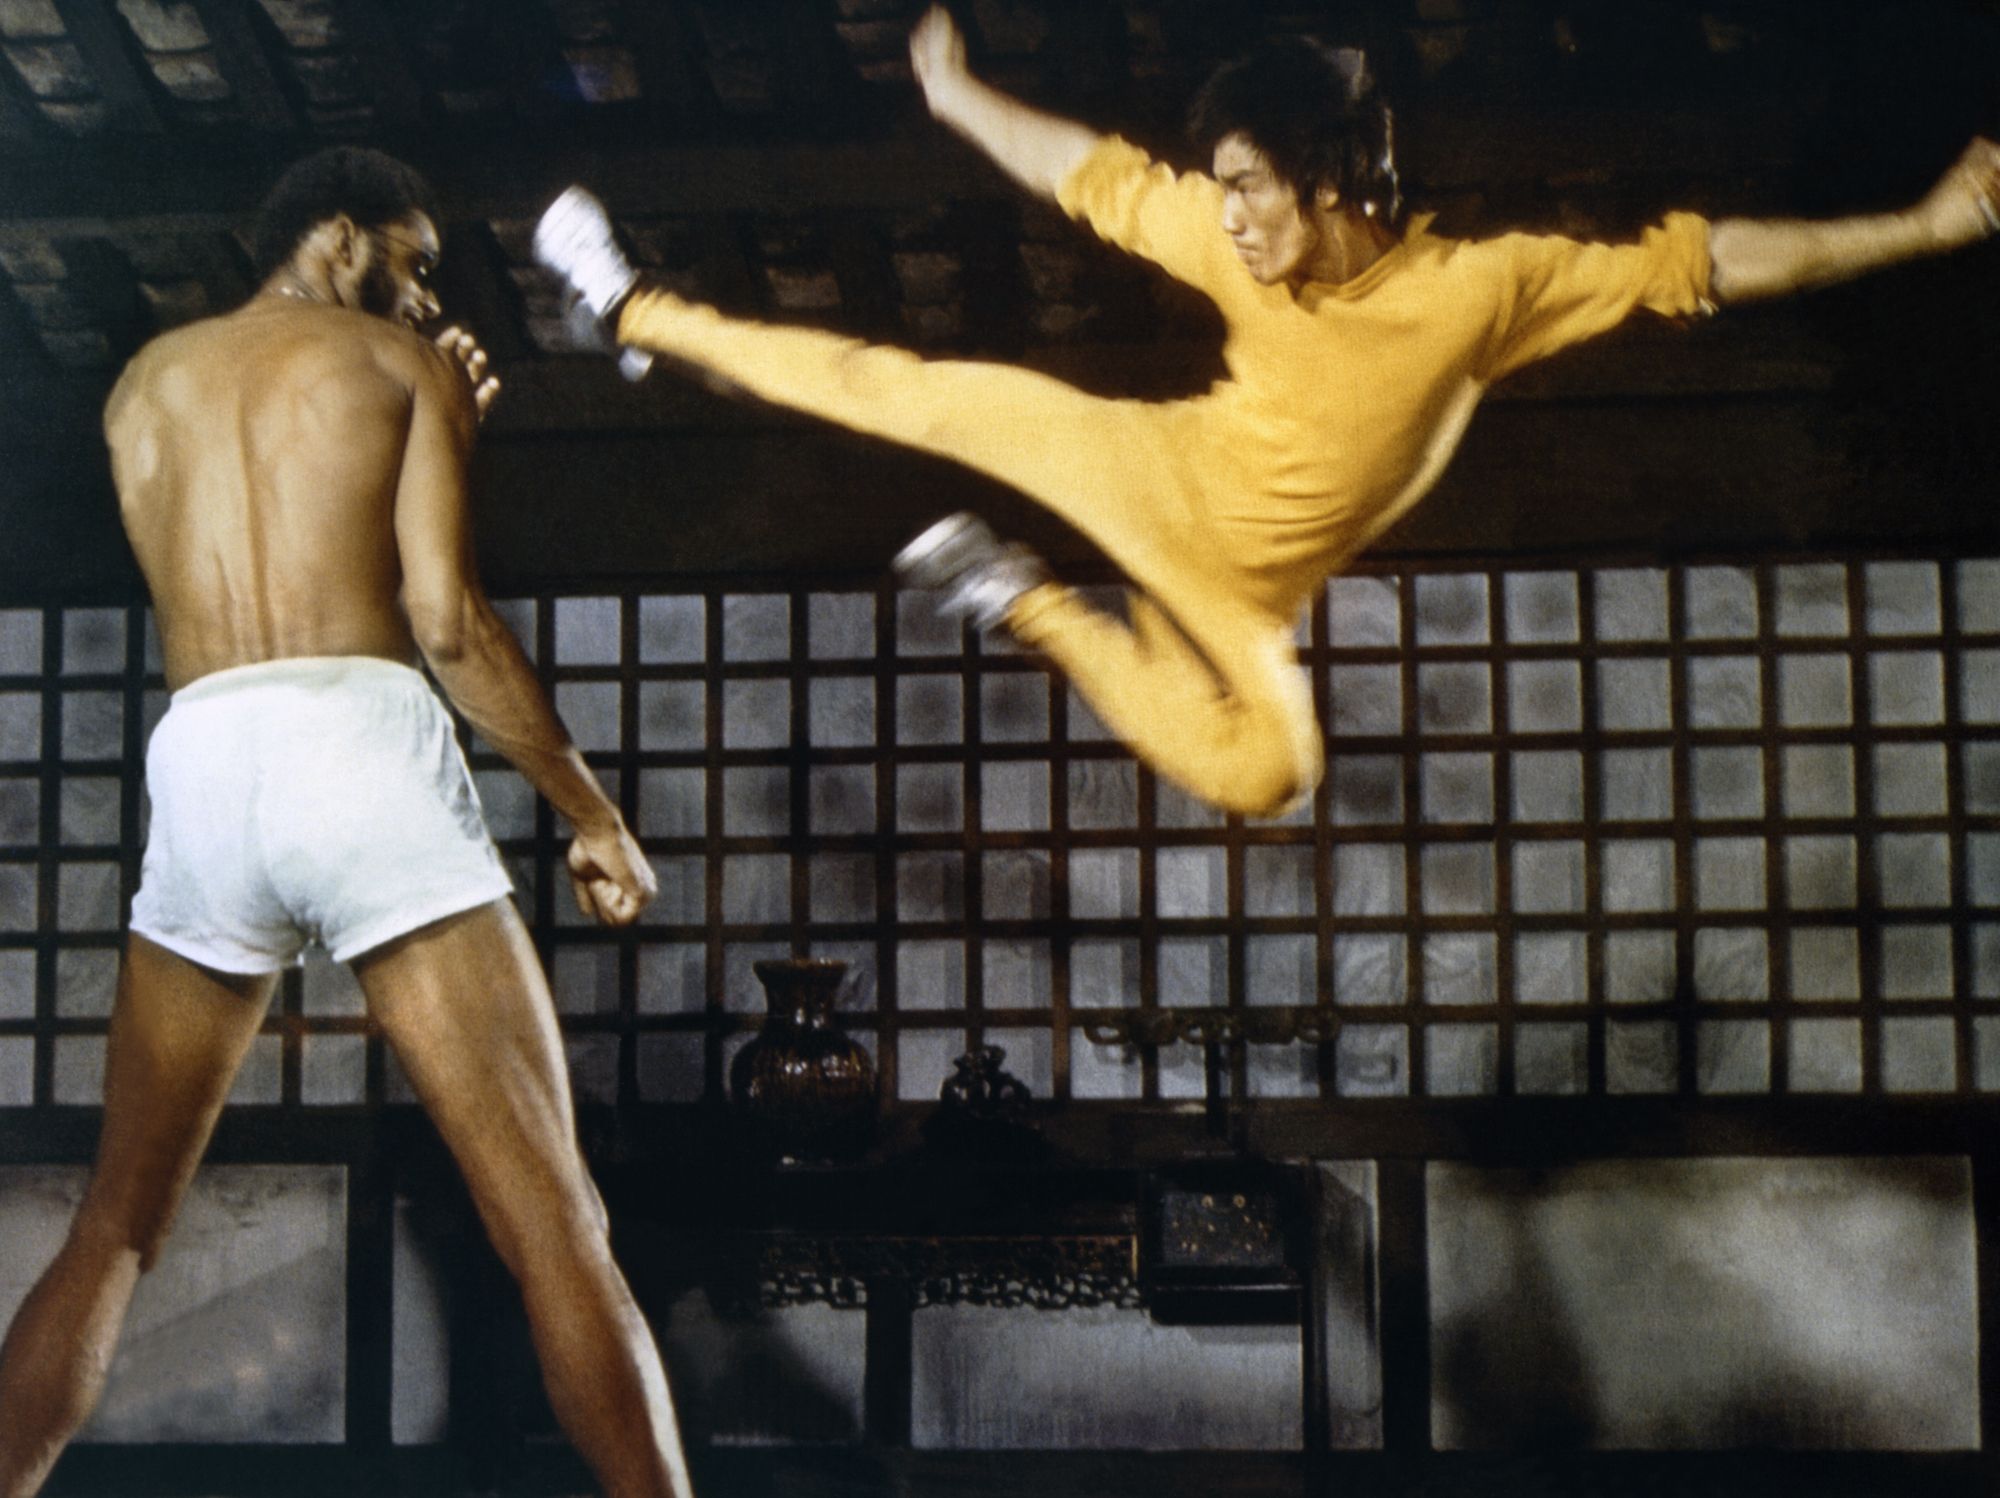 Kareem Abdul-Jabbar on Bruce Lee, Once Upon a Time in Hollywood